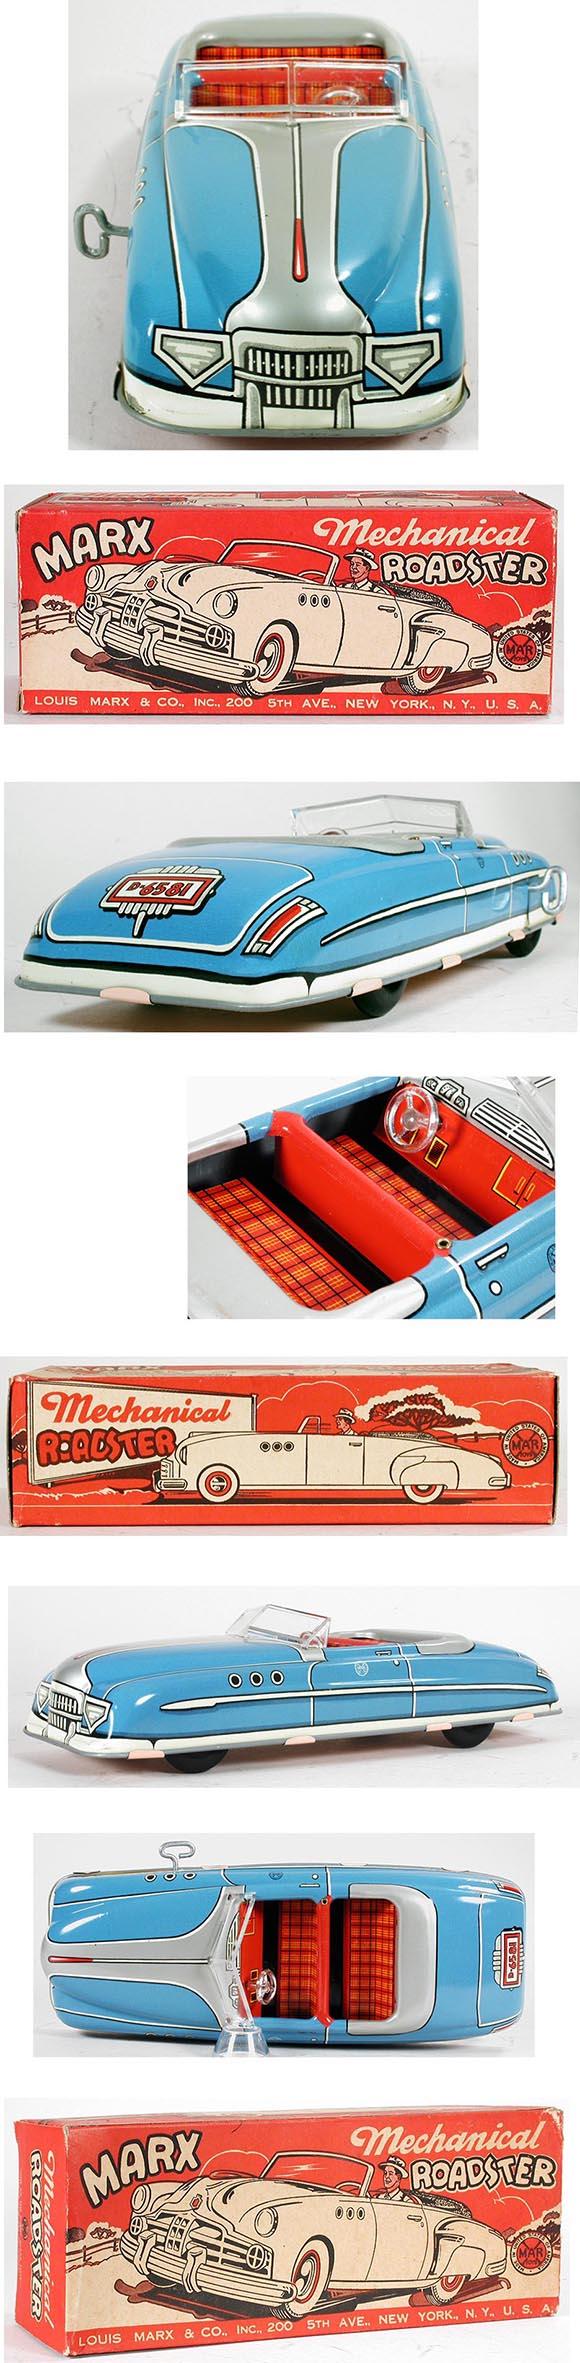 1949 Marx, Mechanical Roadster (Turquoise Blue) in Original Box